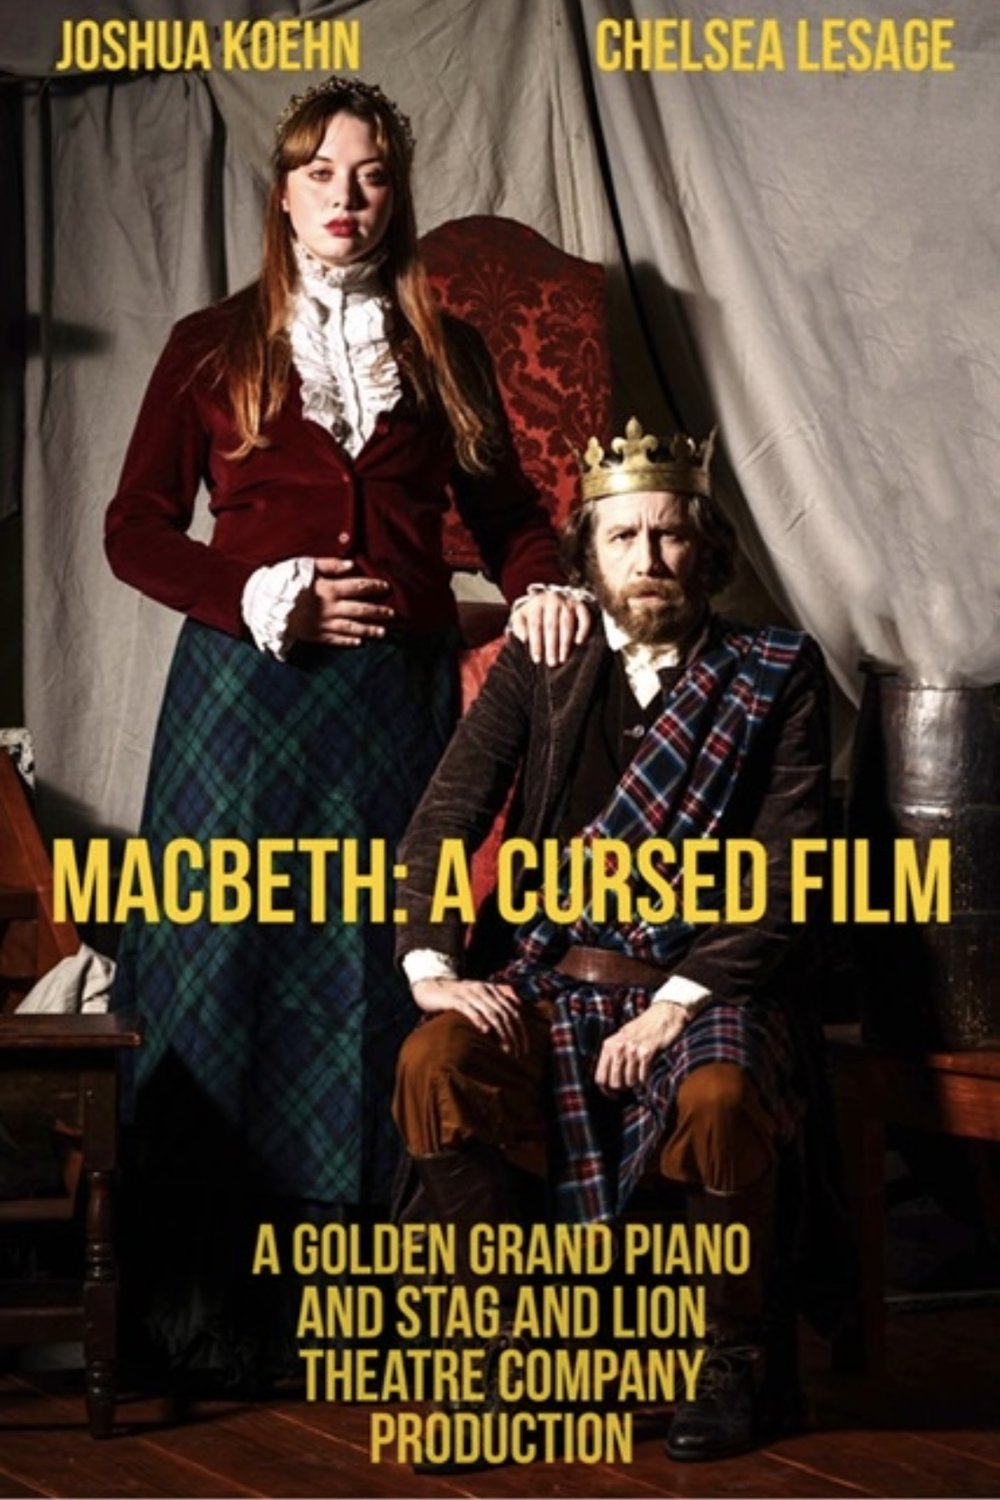 Poster of the movie Macbeth: A Cursed Film